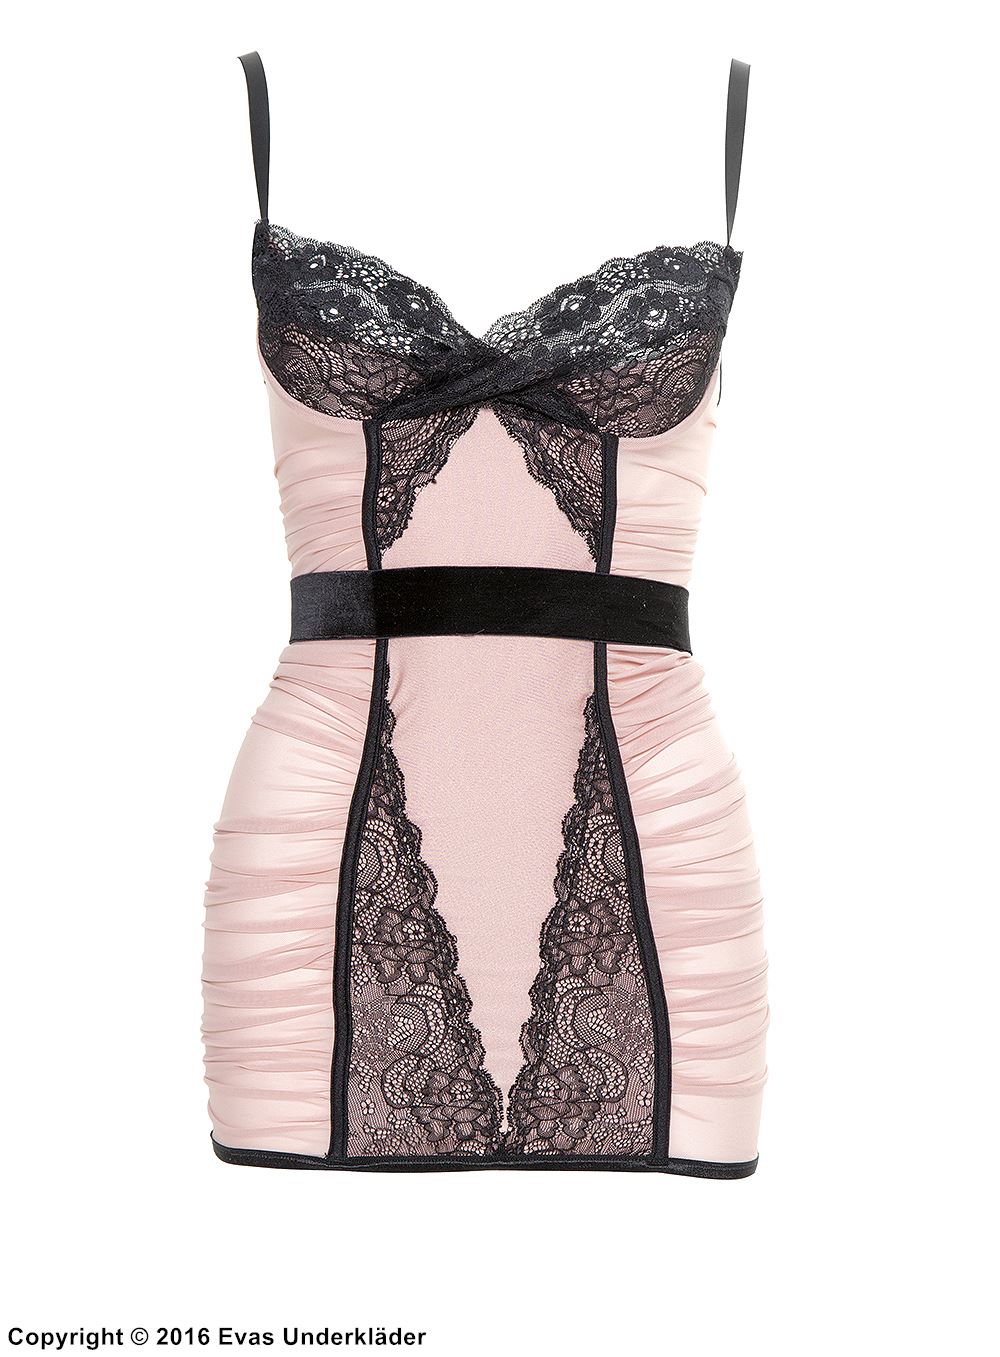 Skin-tight chemise, lace, wrinkled mesh, peek-a-boo cups